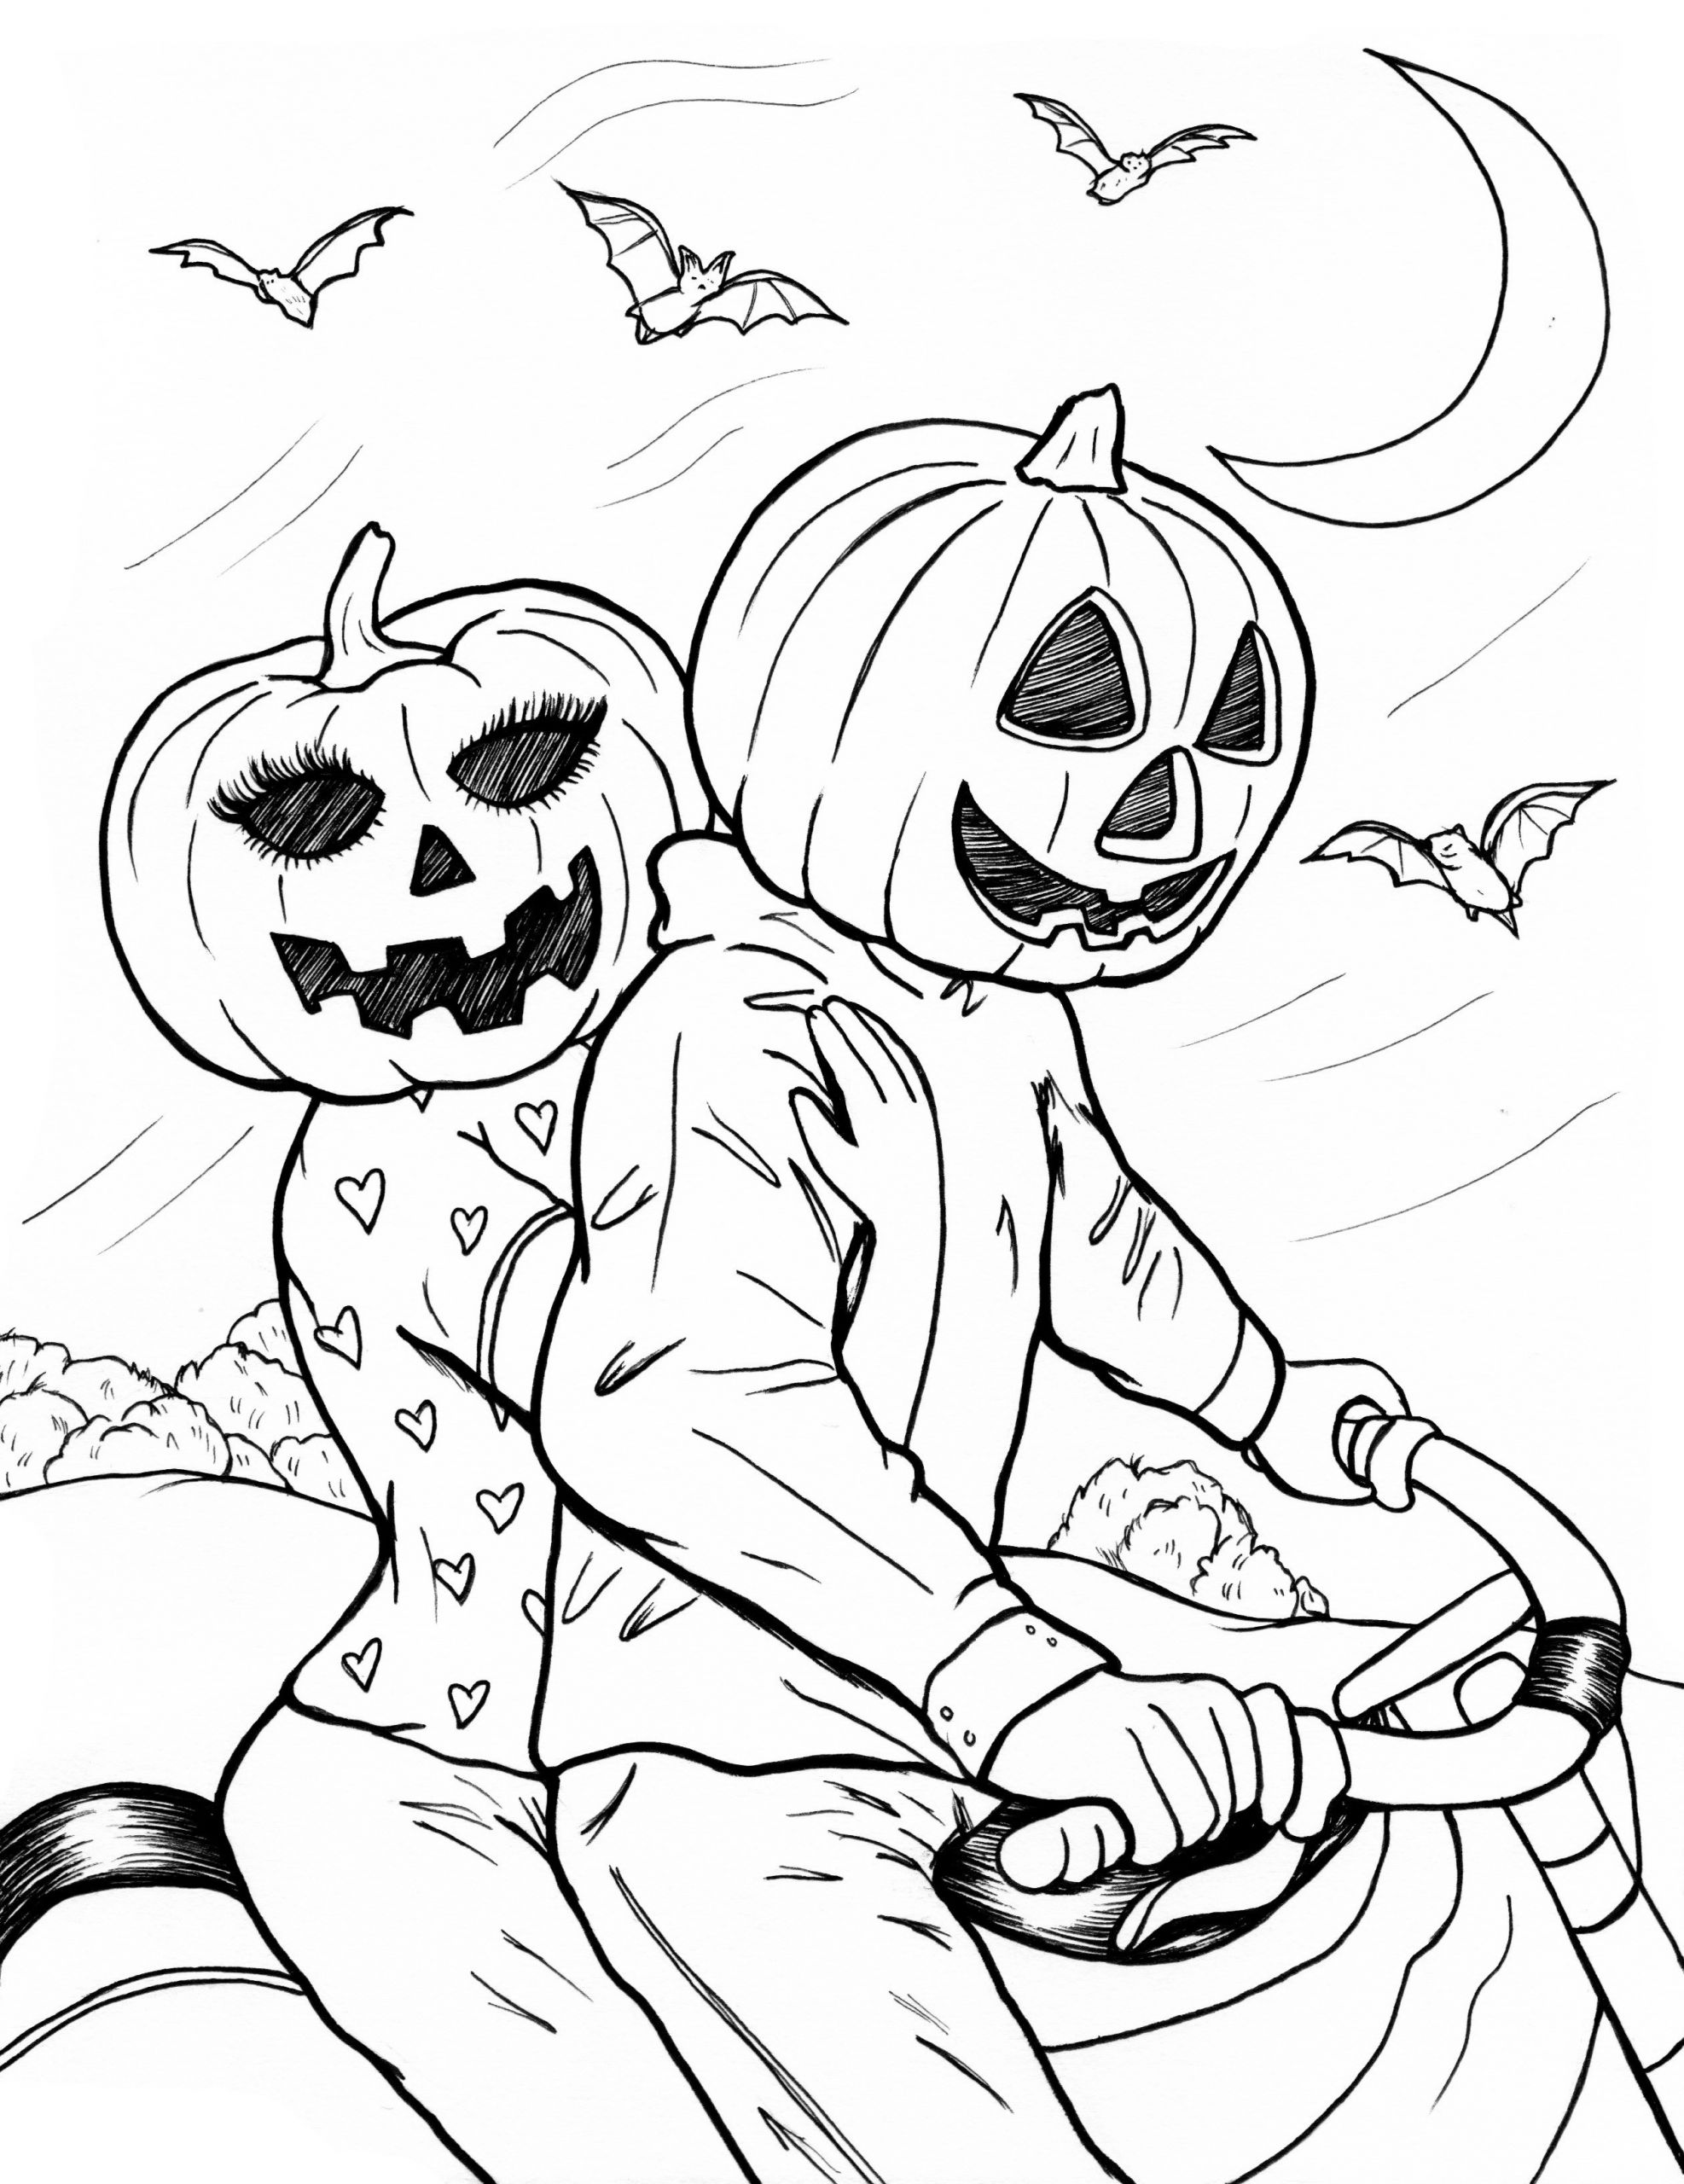 Printable Halloween Coloring Pages
 Rookie Saturday Printable Halloween Coloring Pages